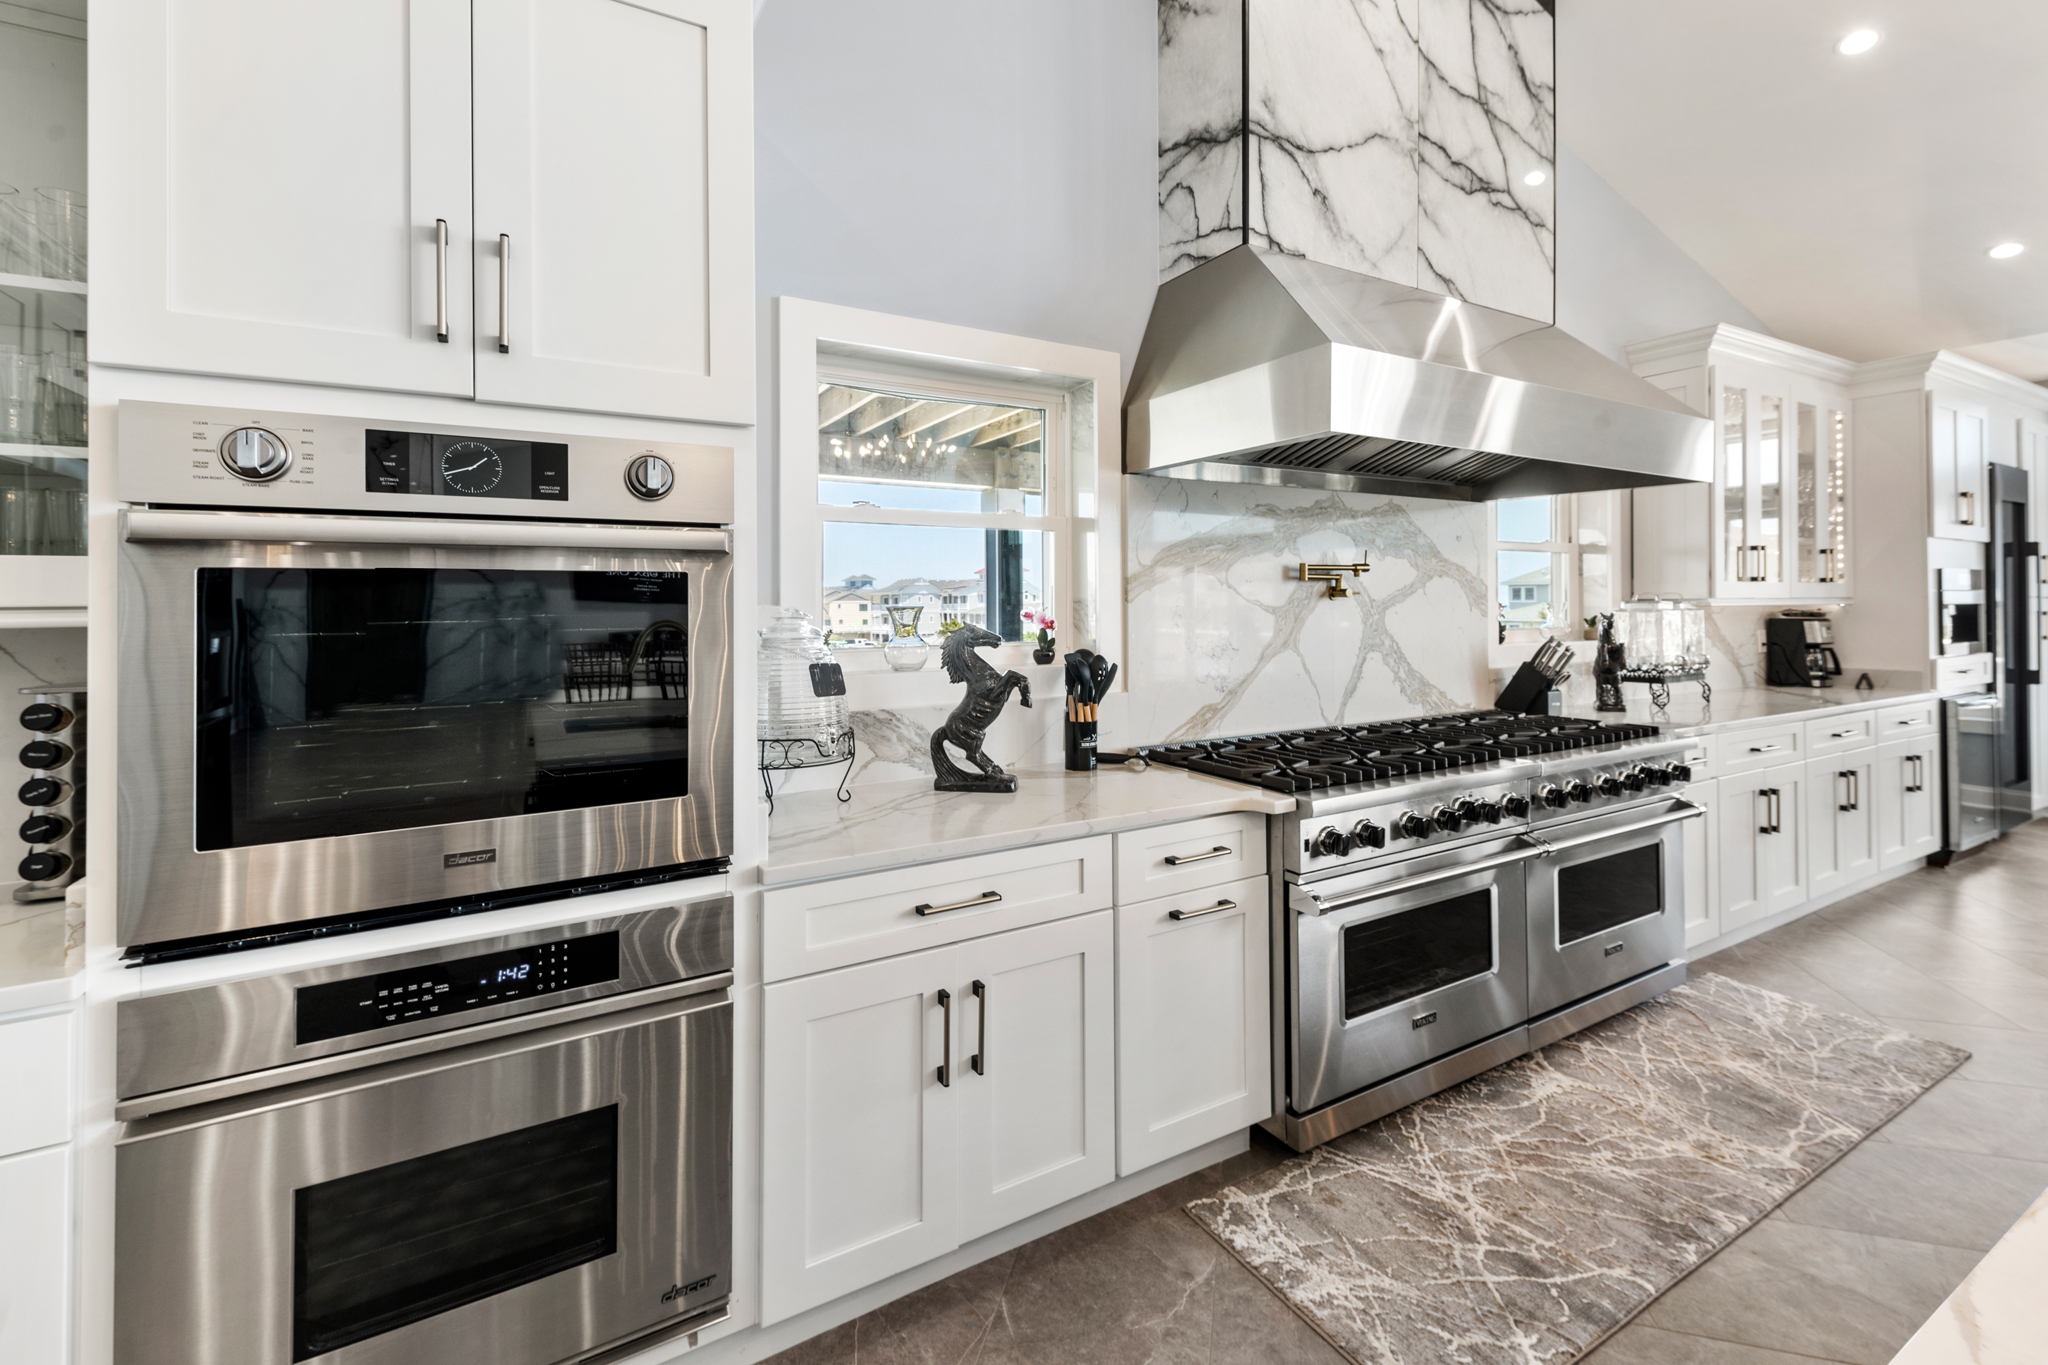 WH786: The OBX One | Top Level Kitchen